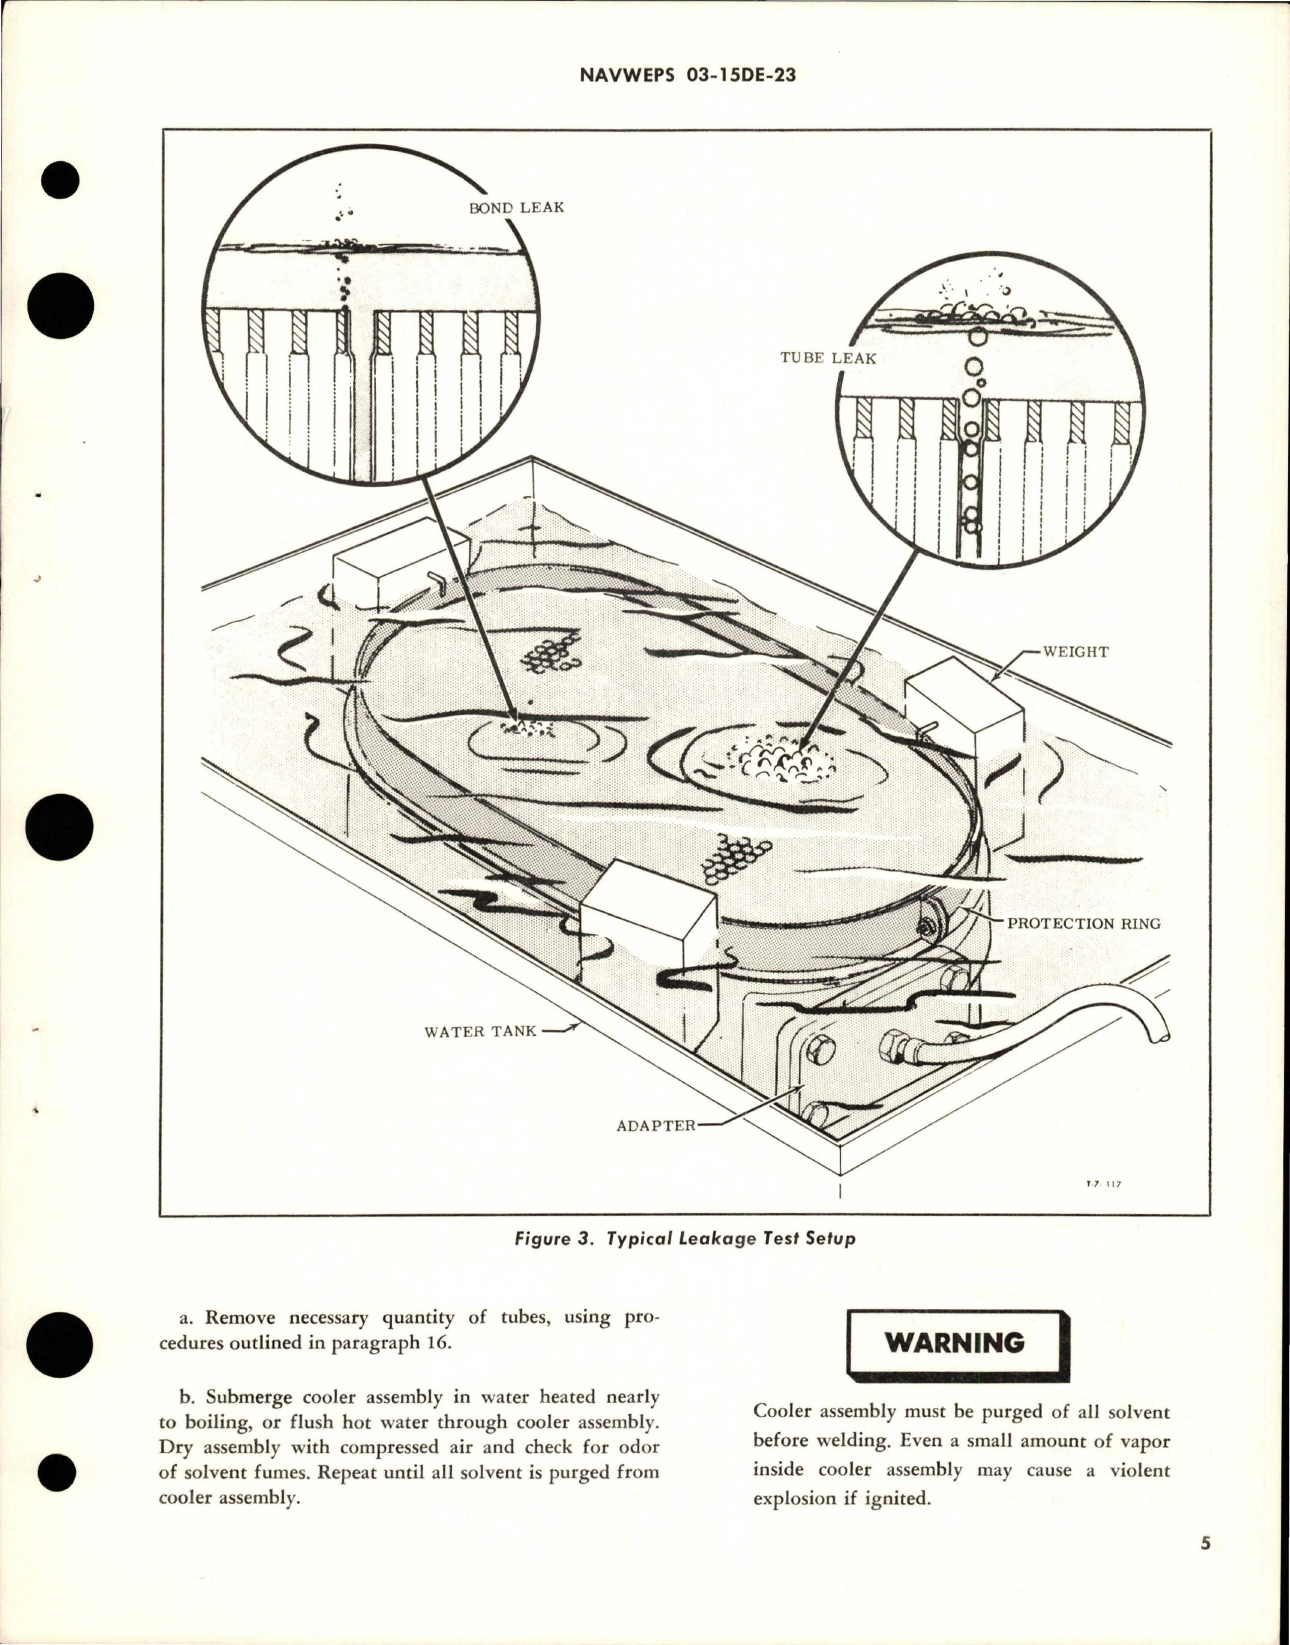 Sample page 5 from AirCorps Library document: Overhaul Instructions with Parts Breakdown for Aircraft Tubular Oil Cooler - Part 151030